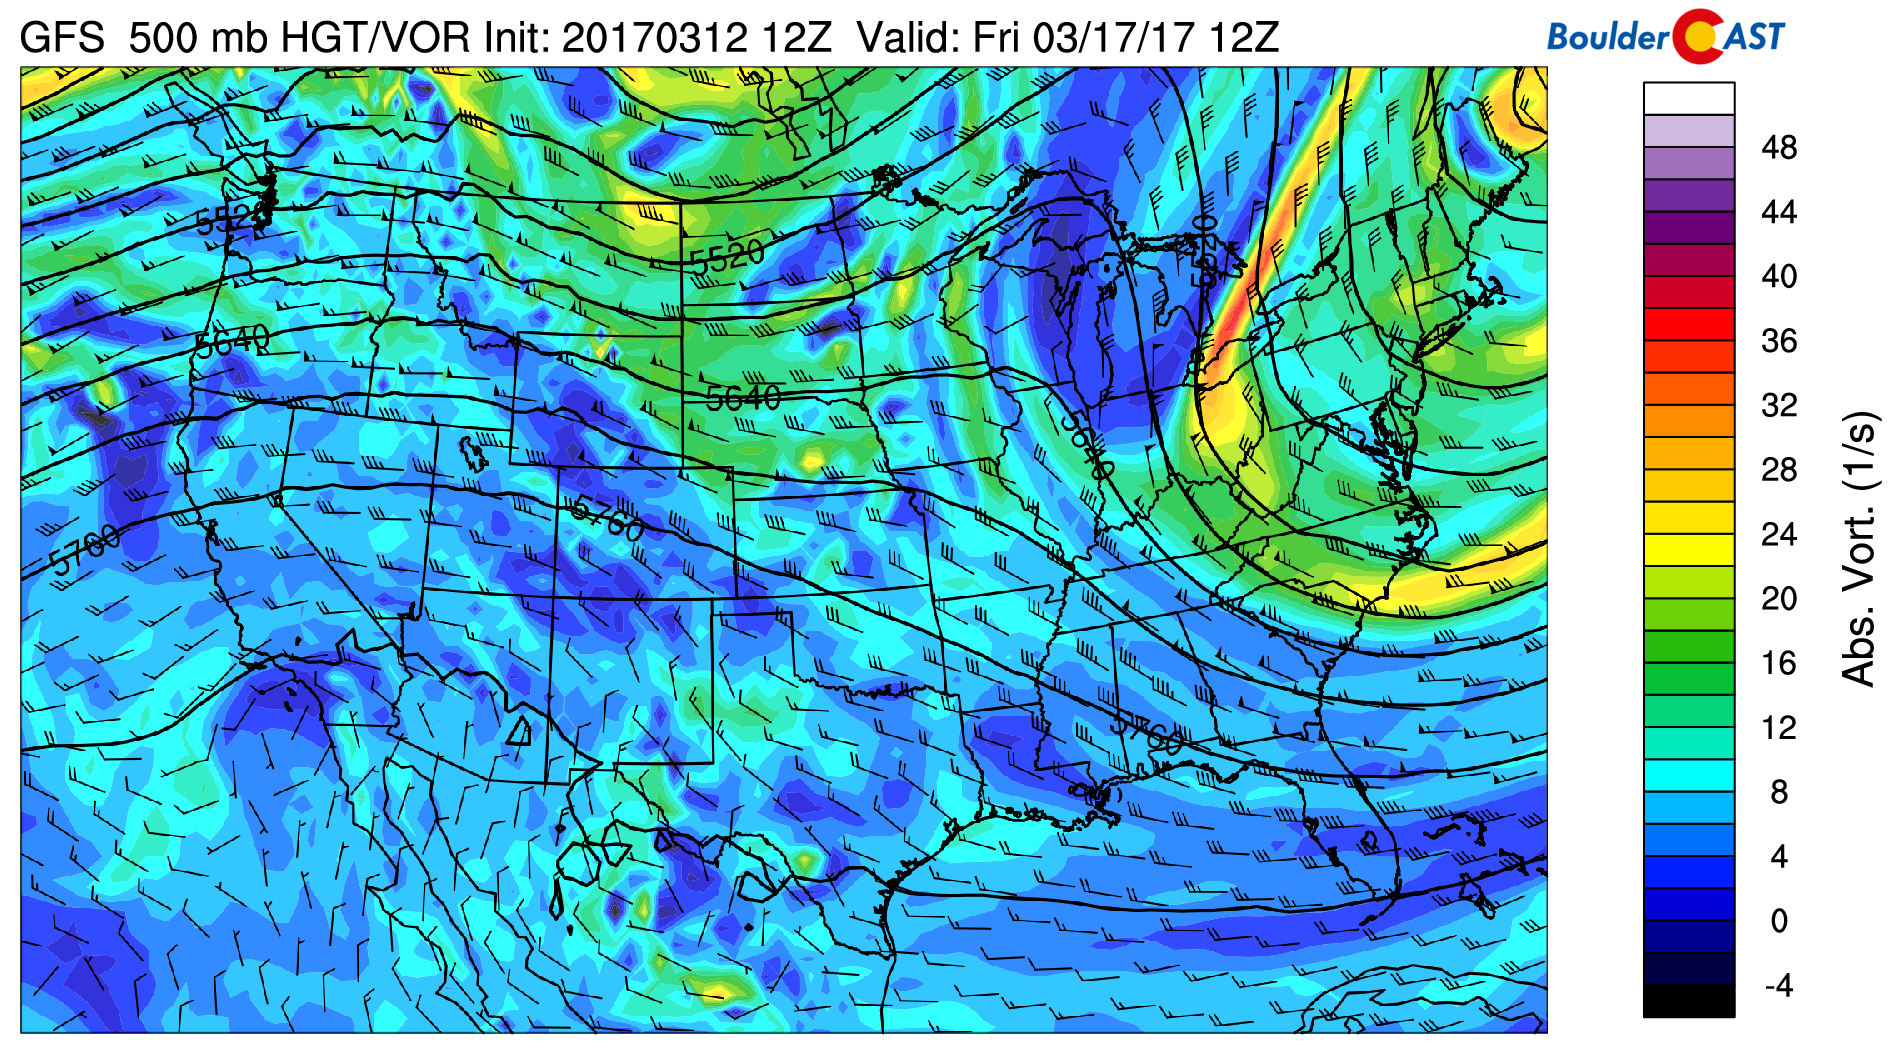 GFS 500 mb absolute vorticity map for Friday